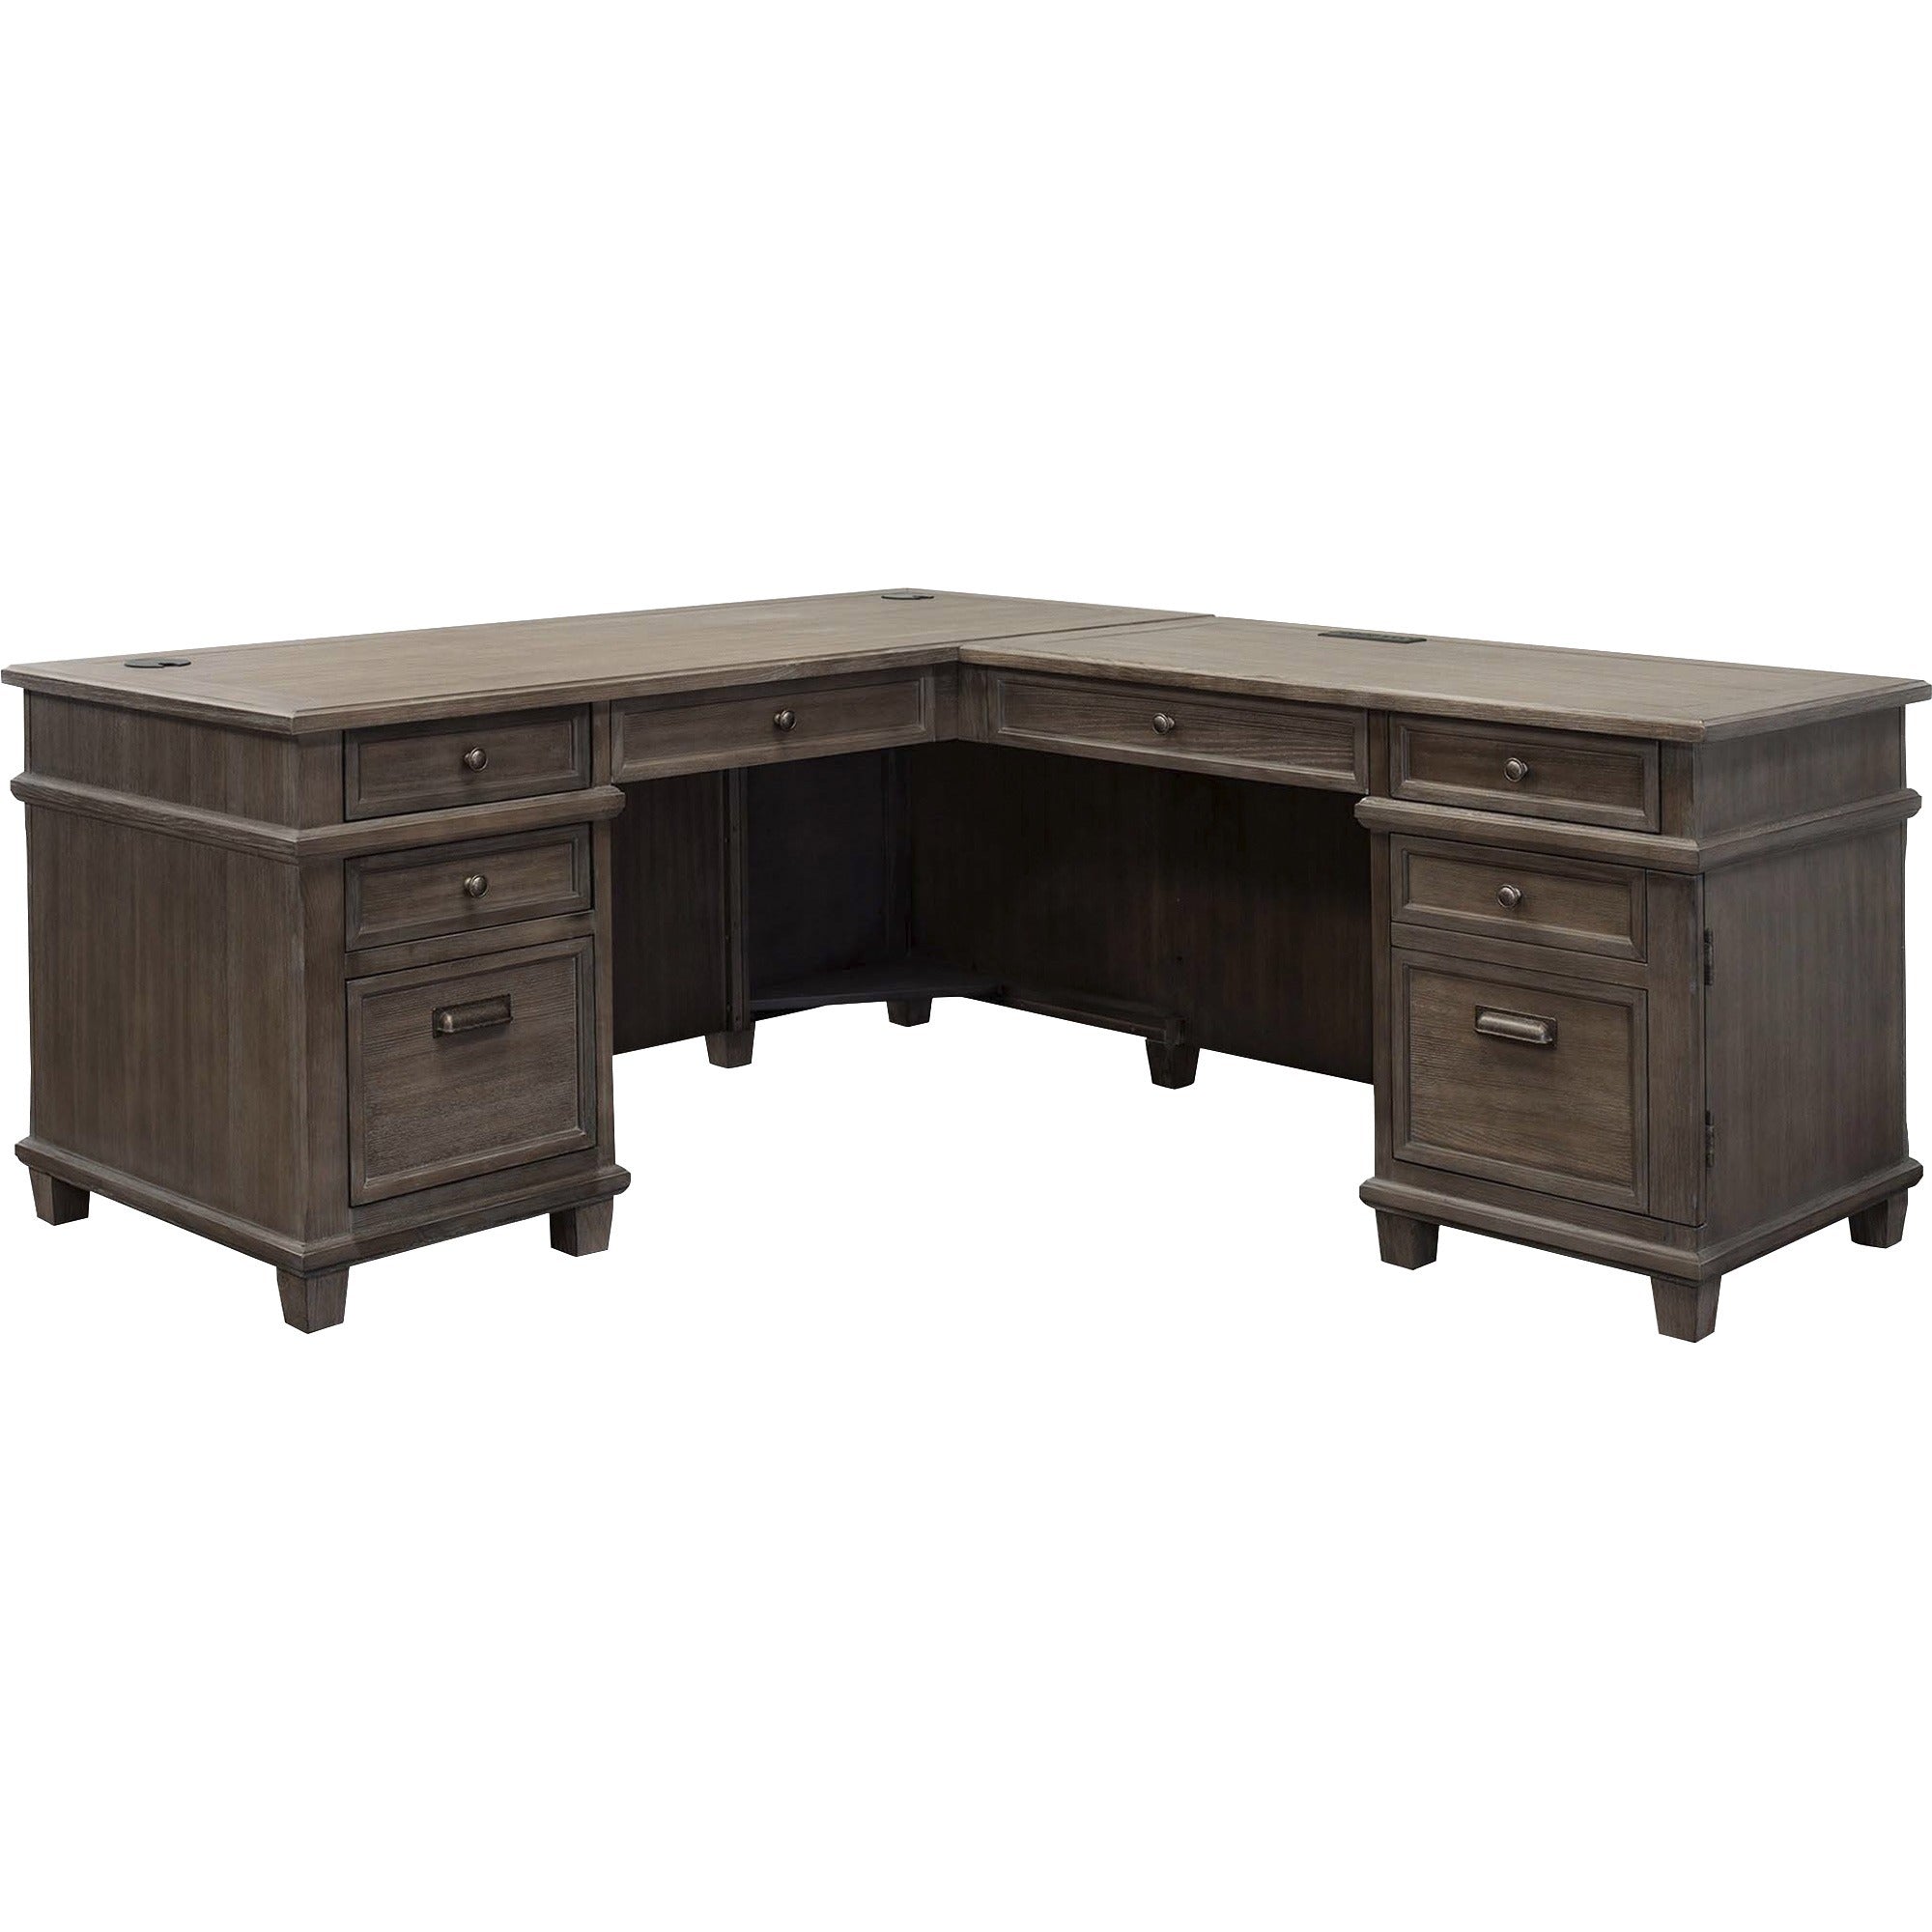 martin-carson-l-desk-with-right-return-pencil-utility-and-file-drawers-utility-storage-file-drawers-finish-weathered-dove_mrtimca684rrr - 1